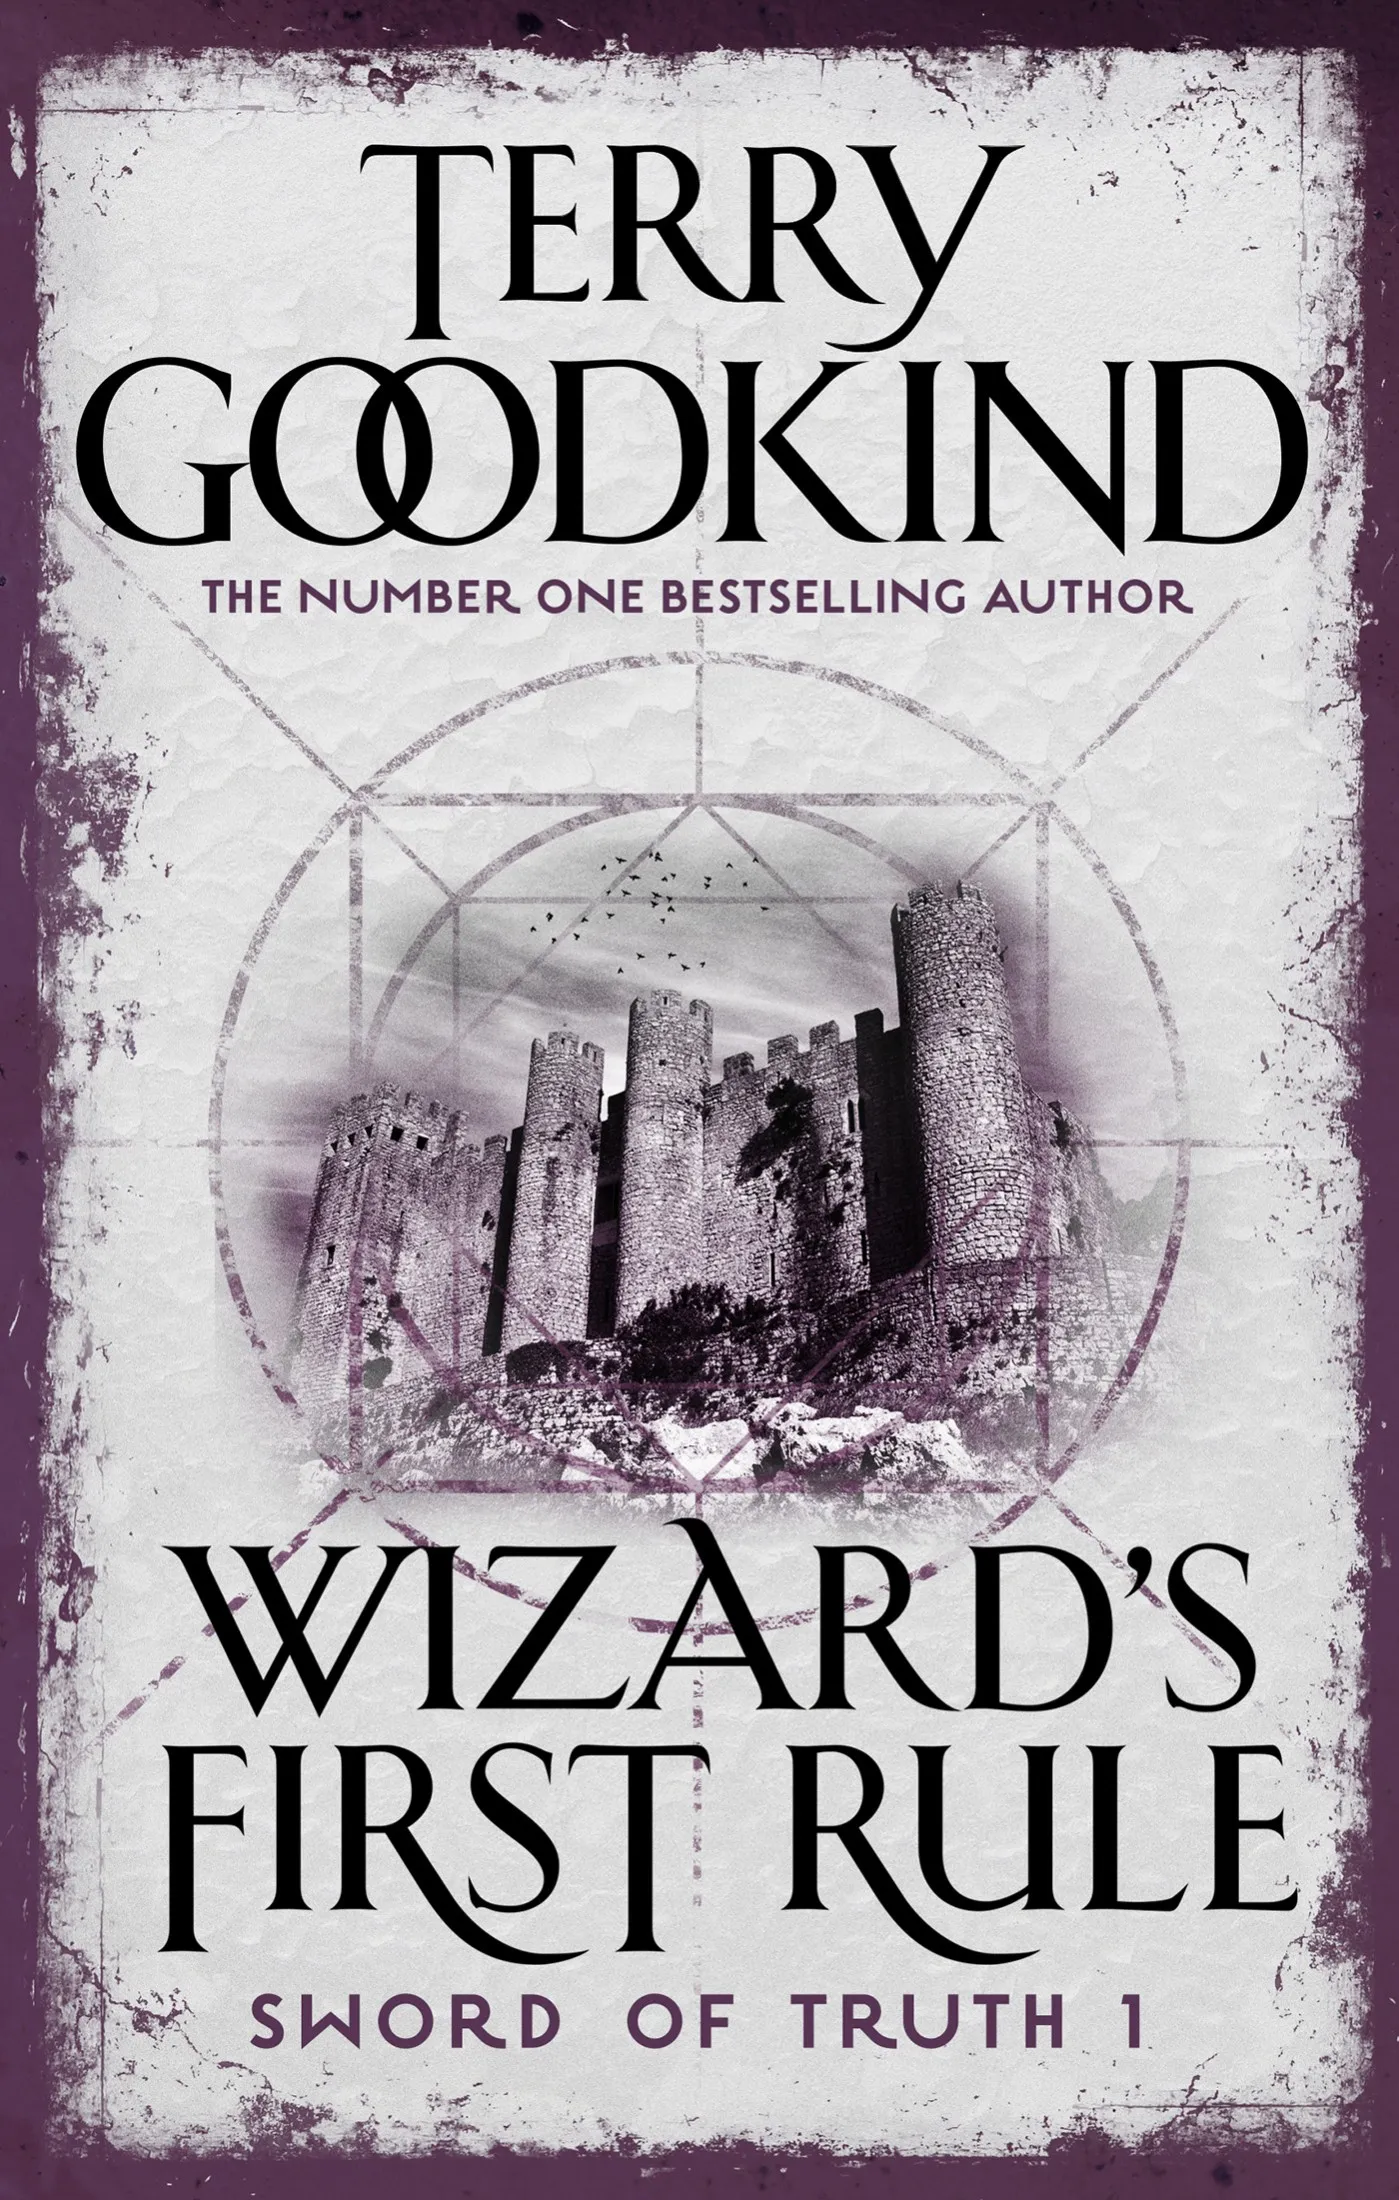 Wizard's First Rule (Sword of Truth #1)